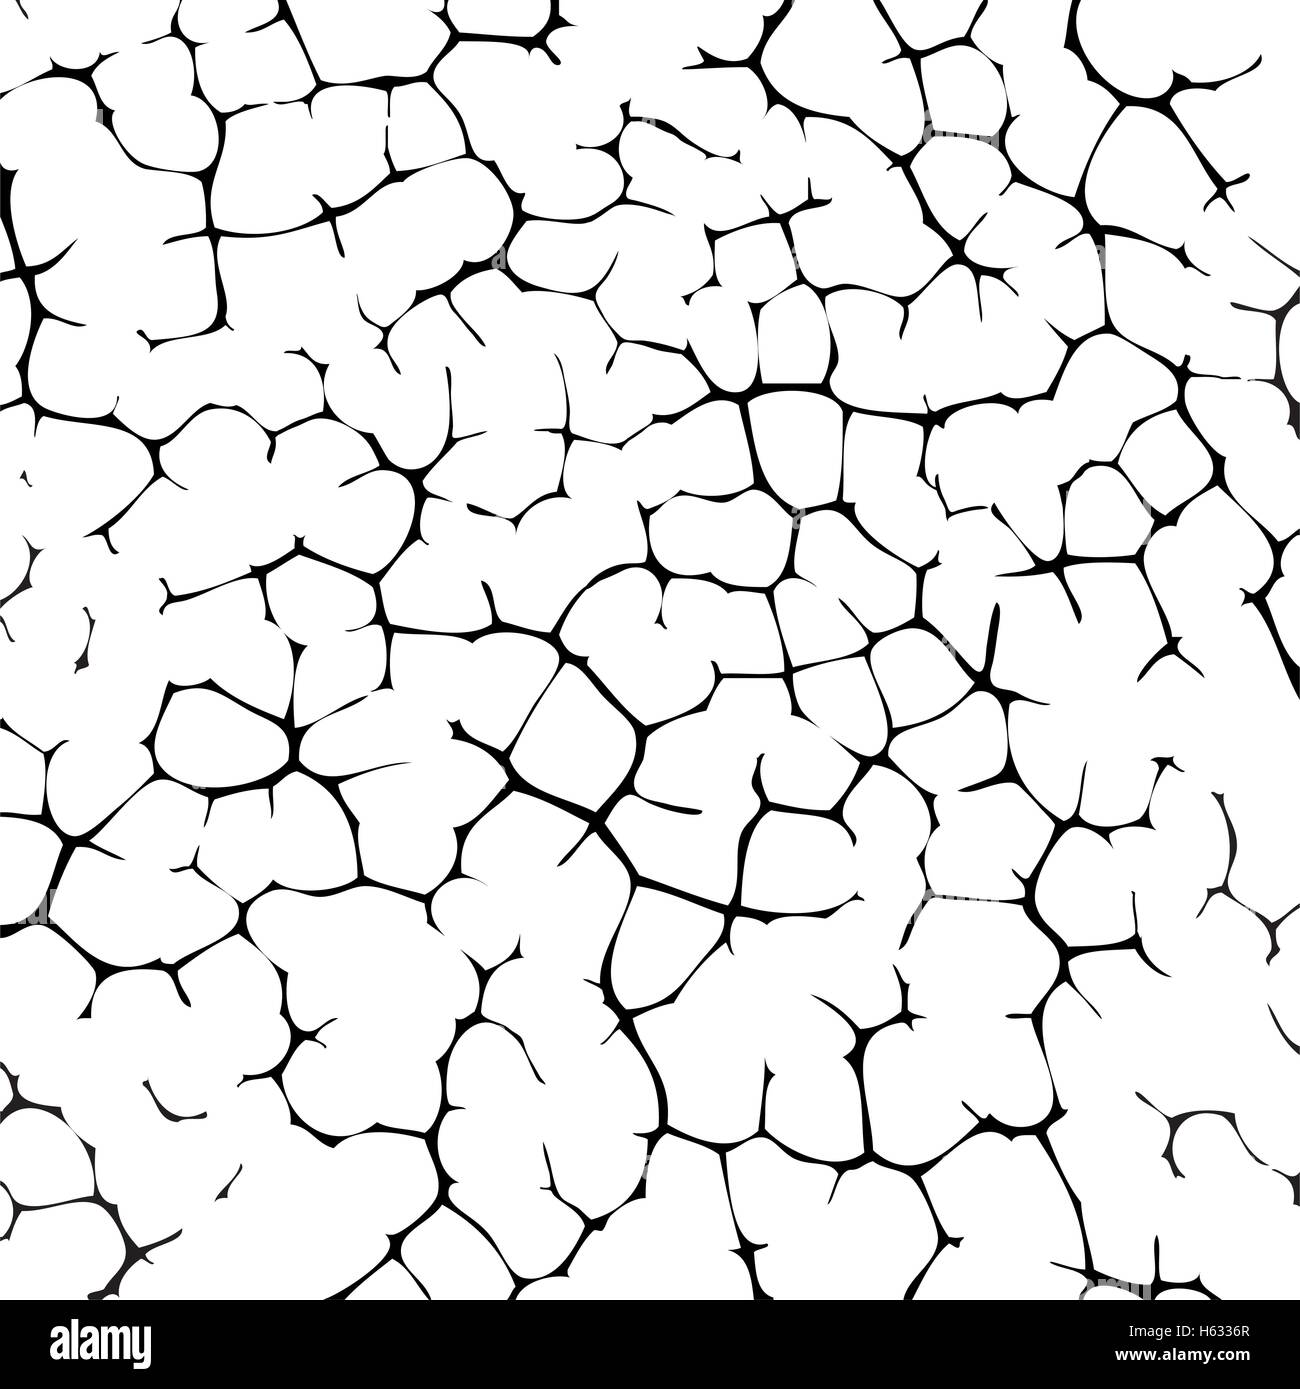 vector black and white cracked texture of wall or earth Stock Vector